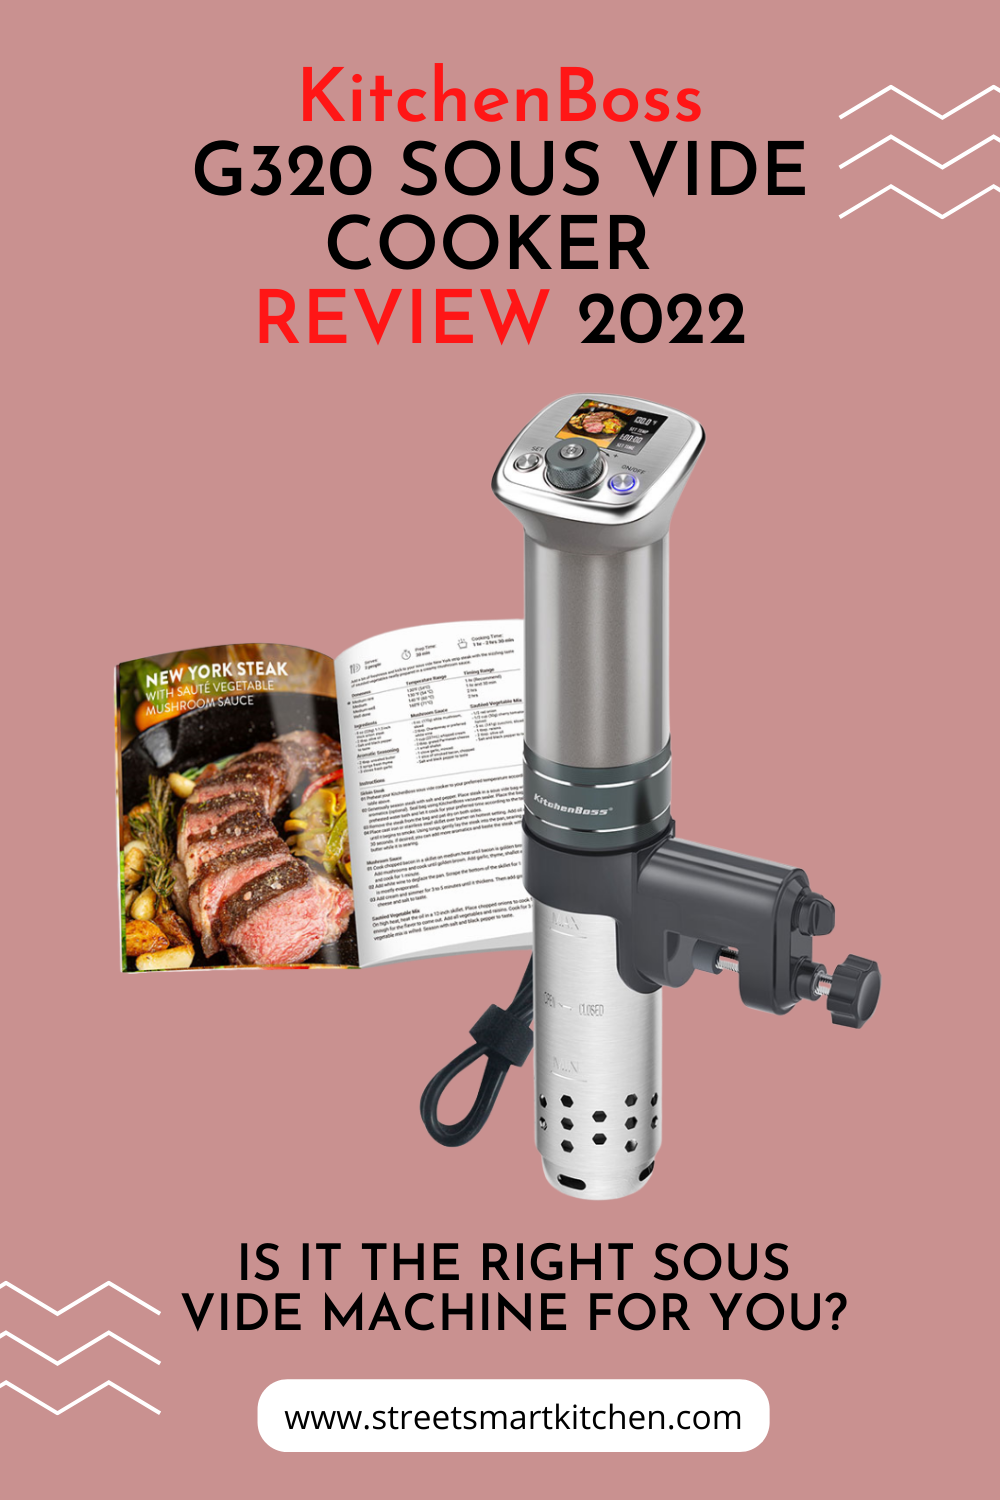 Looking to buy a sous vide machine? Read this in-depth KitchenBoss G320 Sous Vide Cooker review and decide if it's the right fit for you.